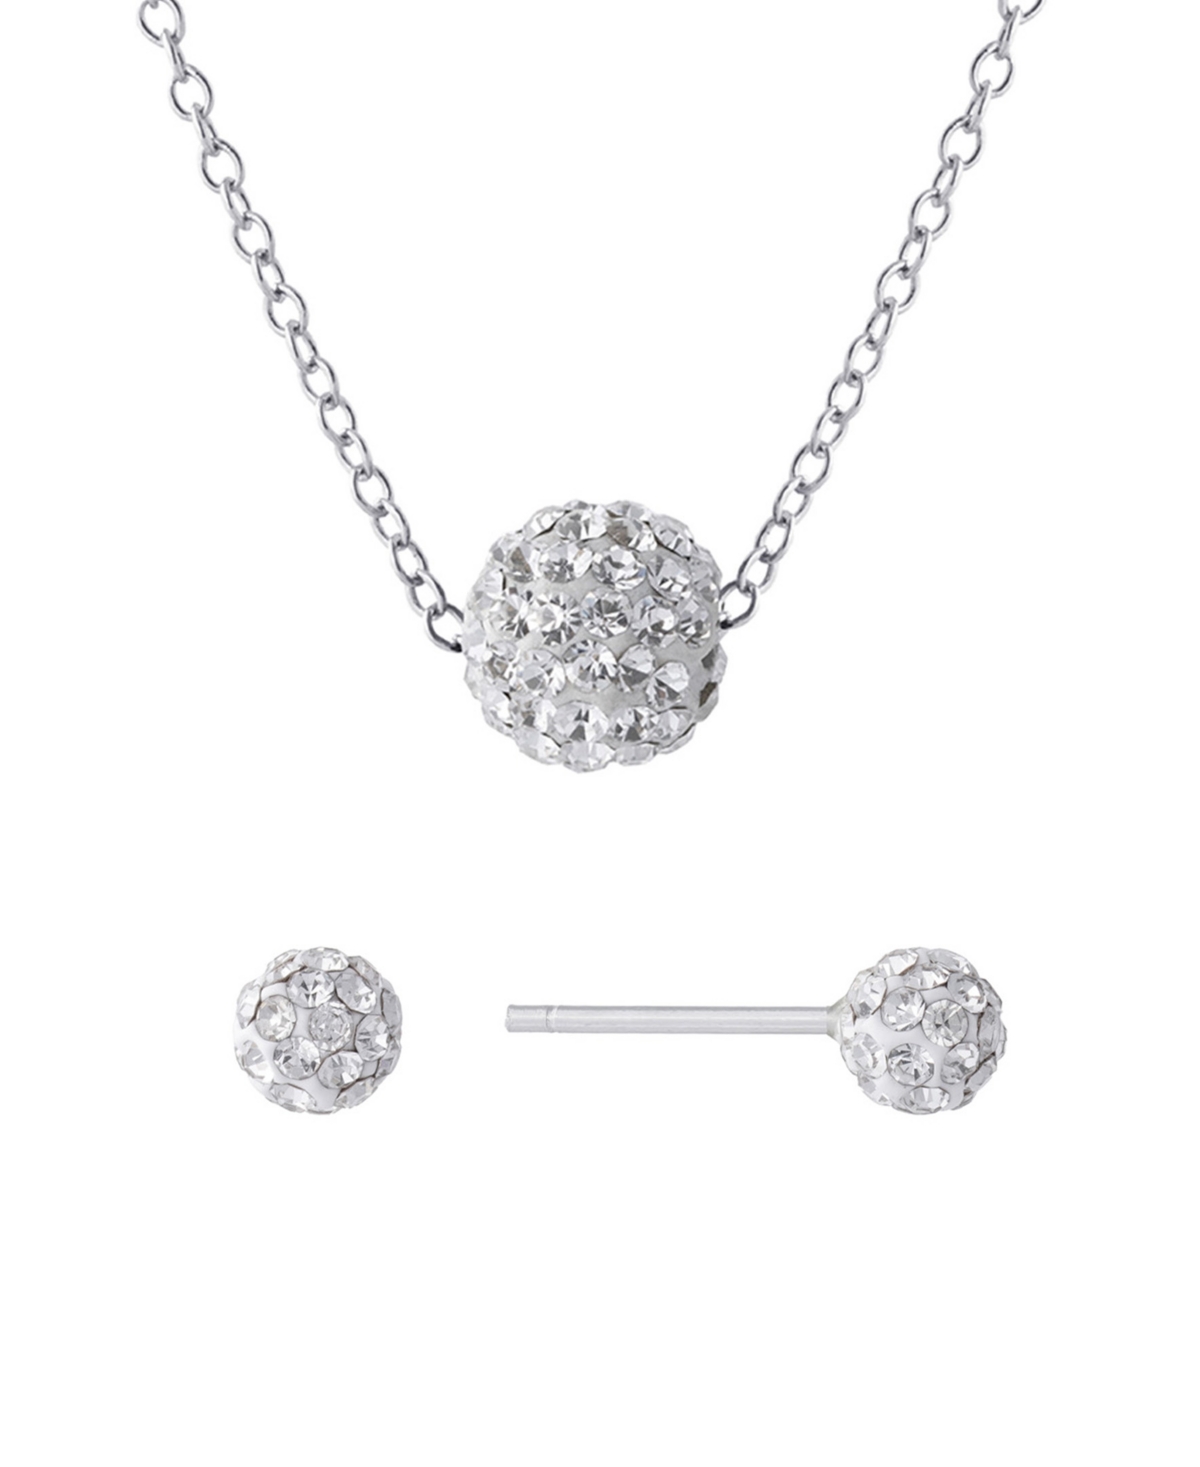 Giani Bernini Gianni Bernini 2-piece Clear Crystal Pave Ball Stud Necklace Set (1.2 Ct. T.w.) In Sterling Silver